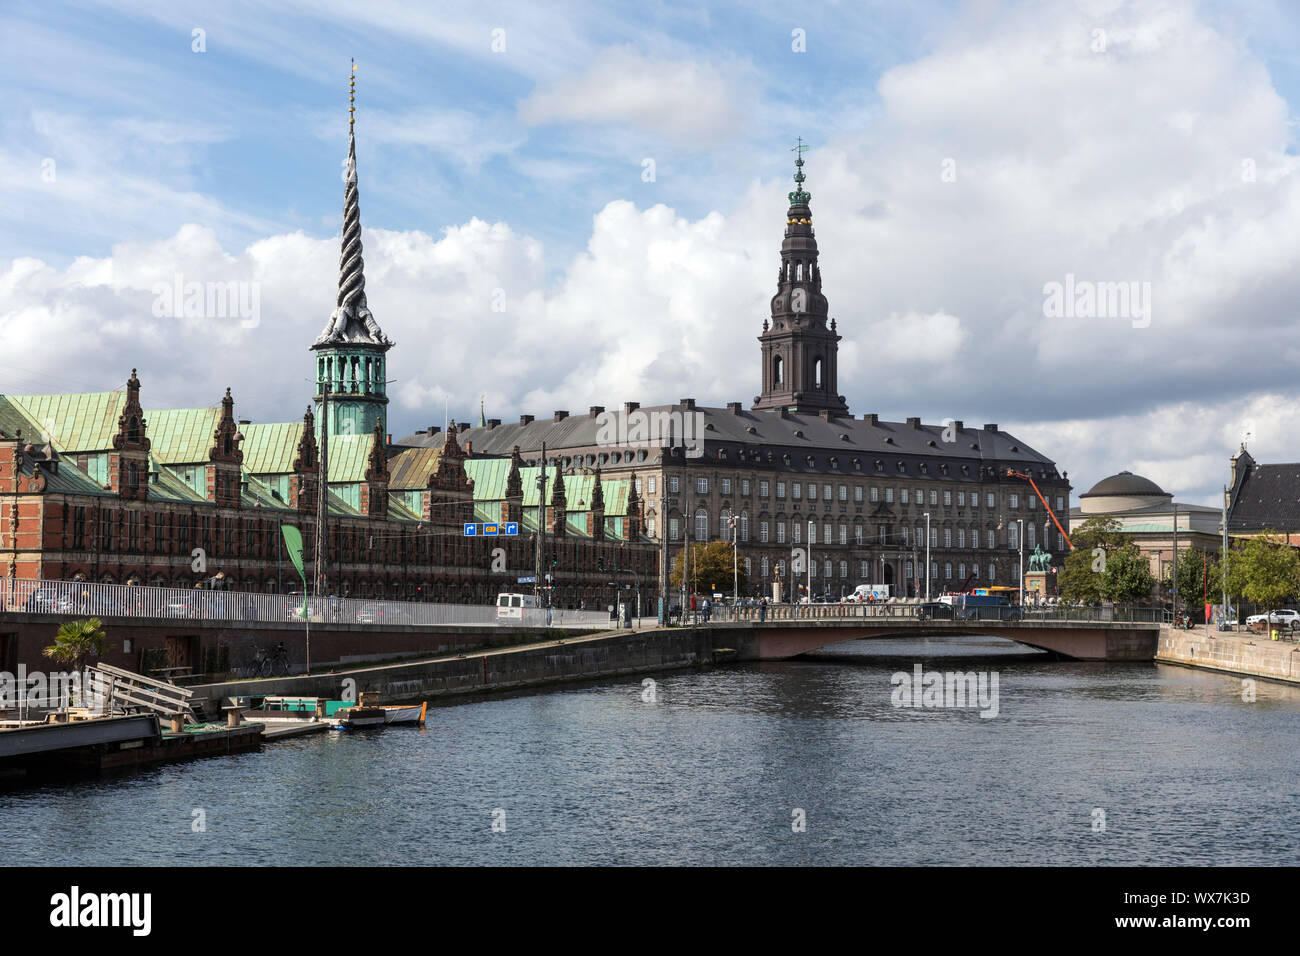 The Christiansborg Palace and Børse building, left, the 17th century former stock exchange, with the canal in the foreground Stock Photo